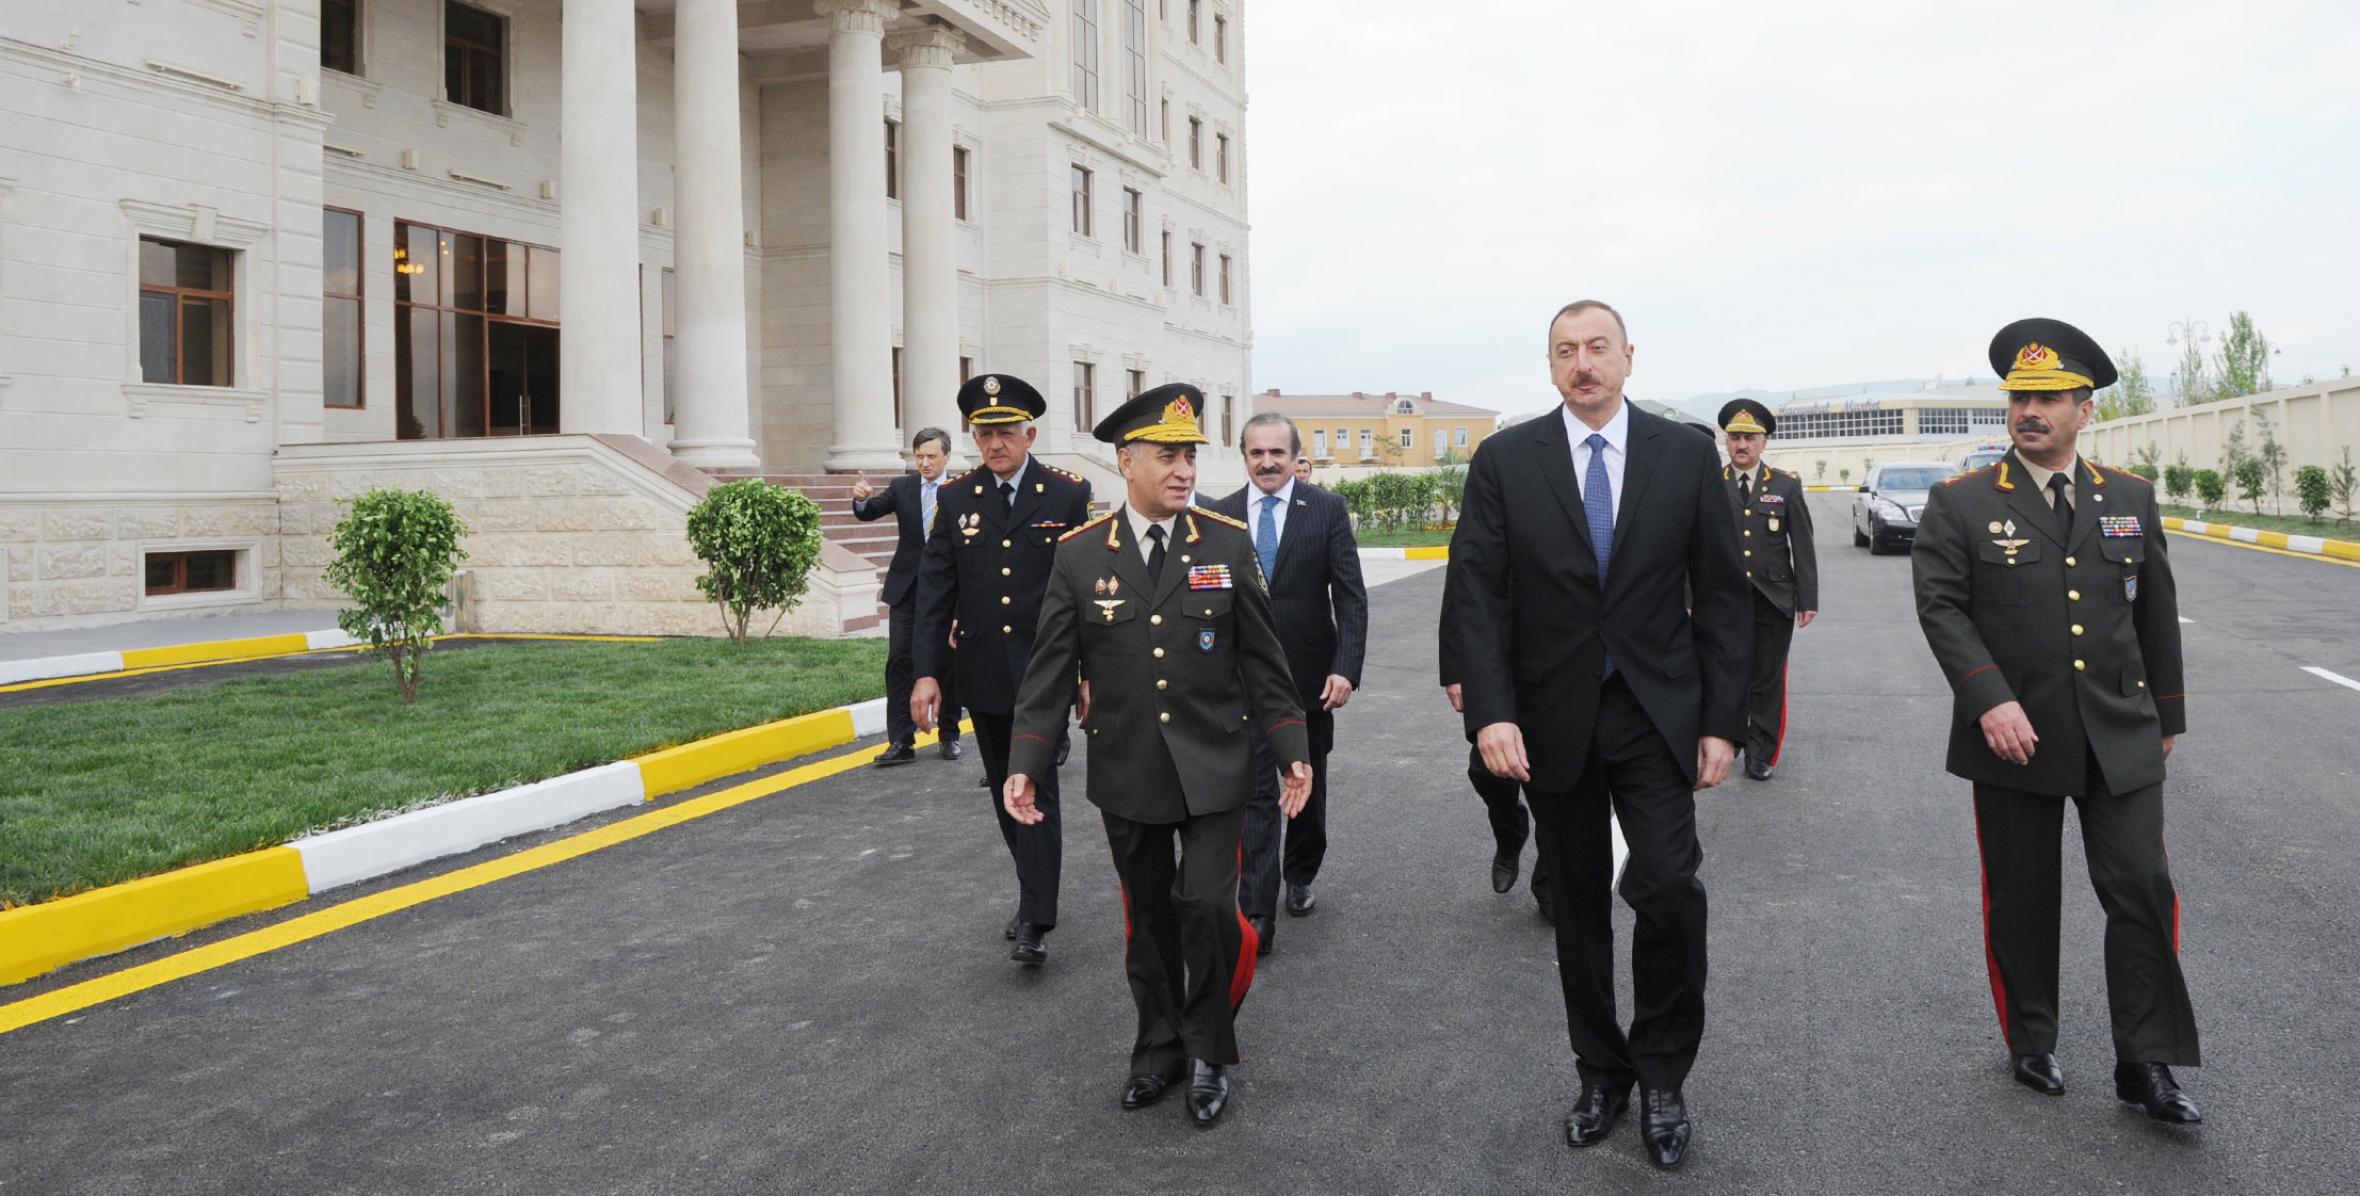 Ilham Aliyev reviewed an interior troops unit in Hajigabul after reconstruction